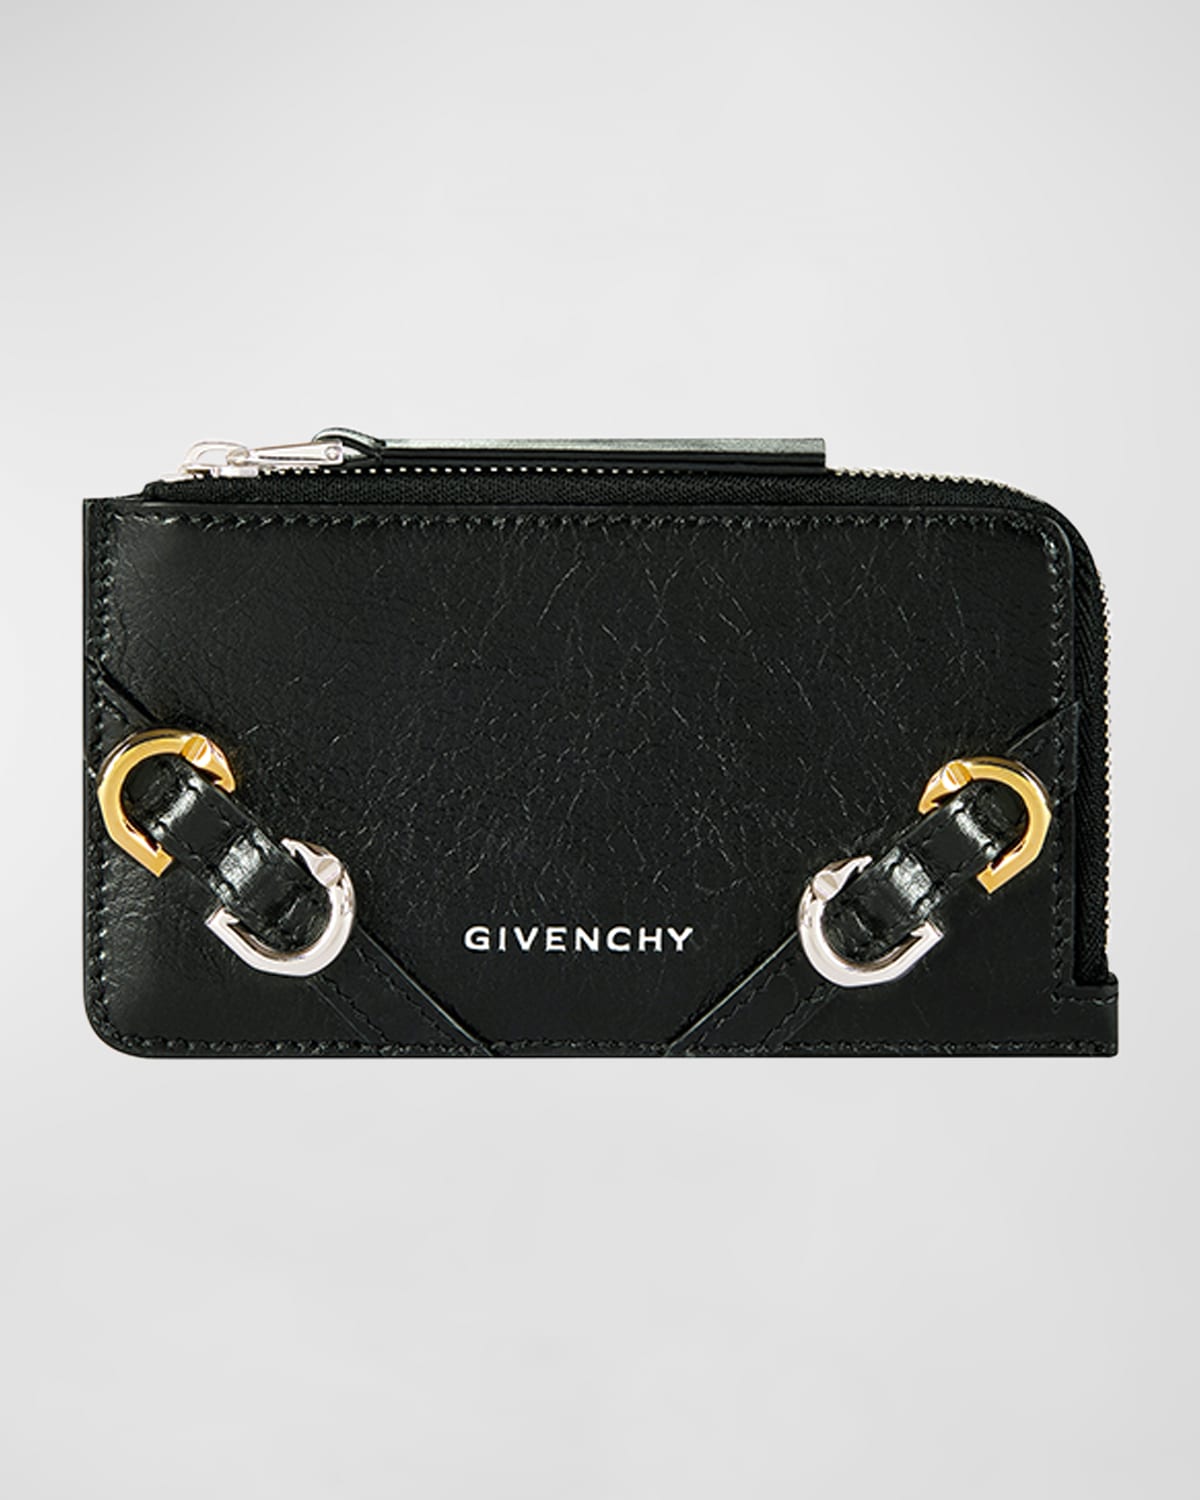 GIVENCHY VOYOU ZIPPED CARDHOLDER IN TUMBLED LEATHER